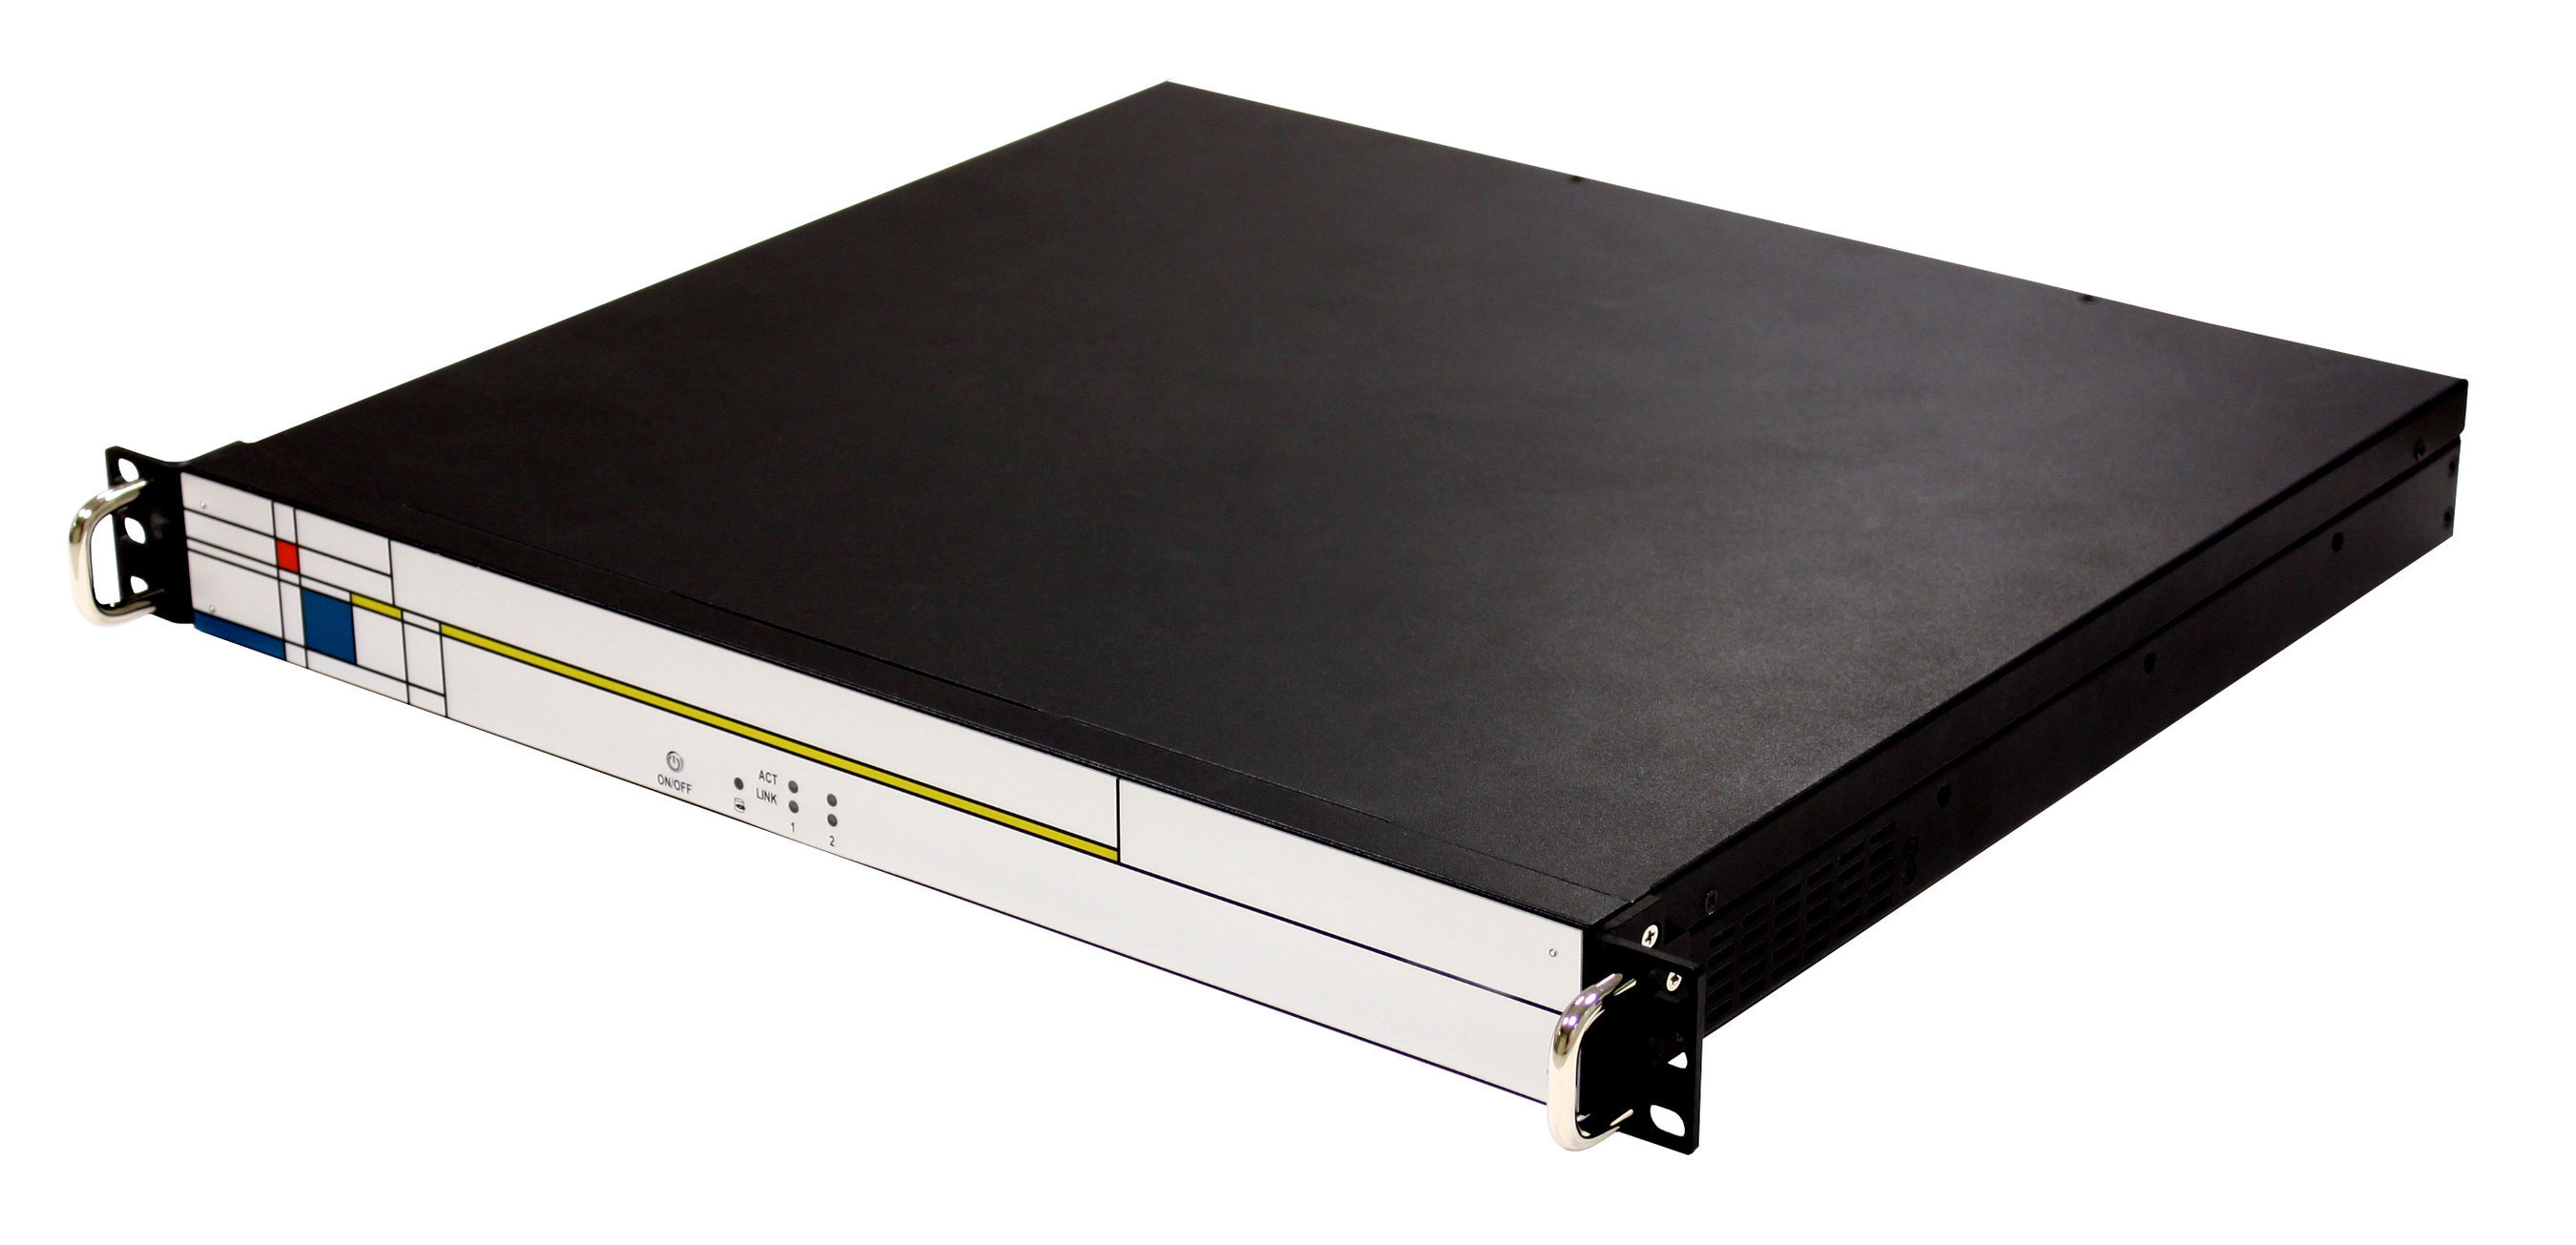 New ELIT-2240 industrial grade box PC for the digital signage market from Arbor Solution.